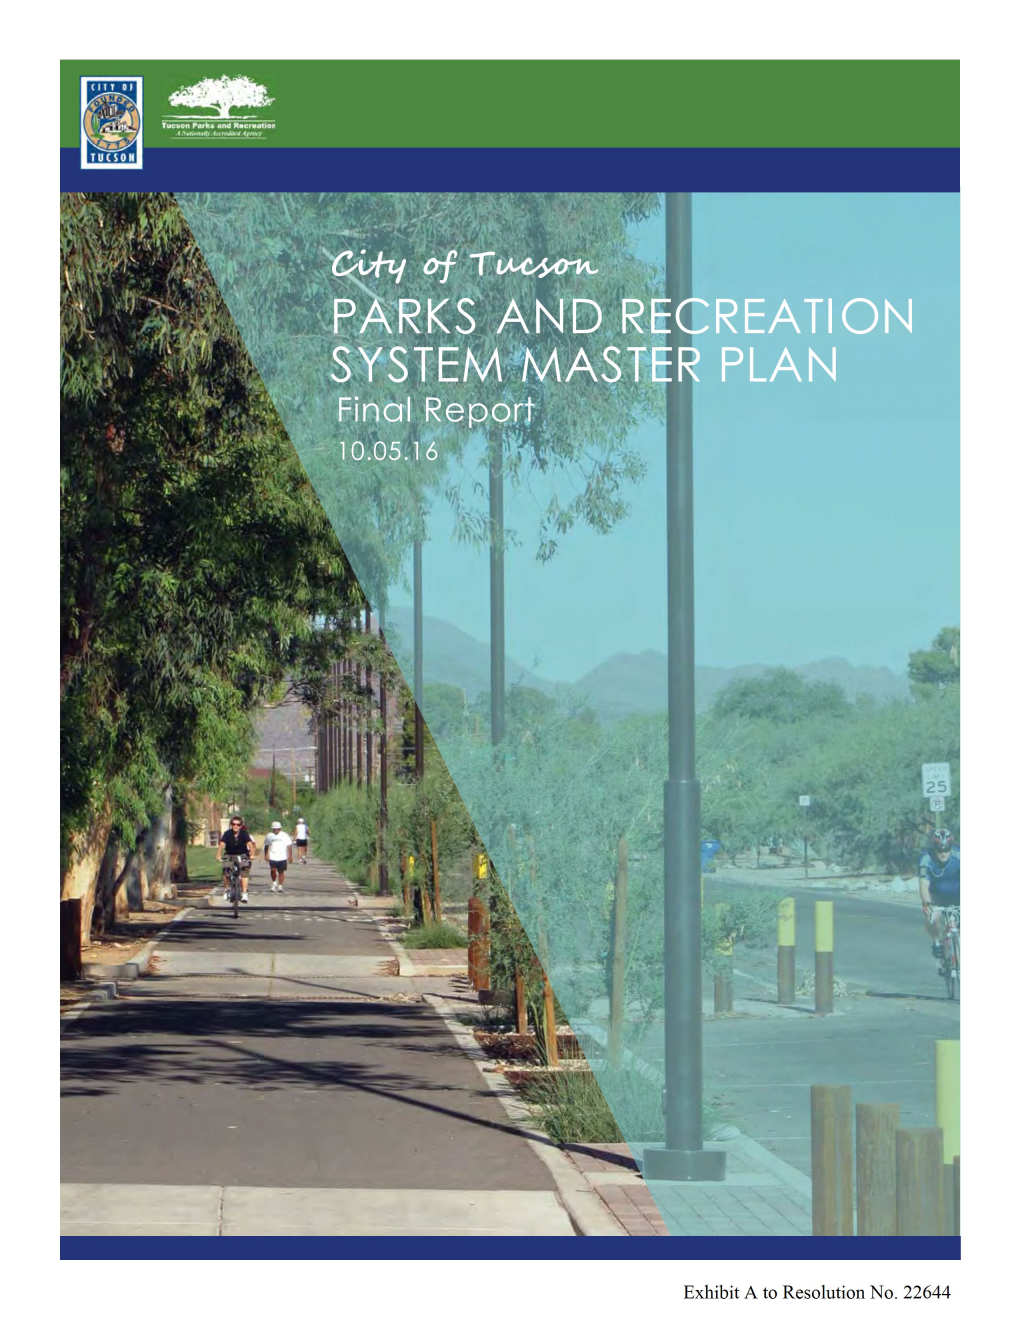 Tucson Parks and Recreation System Master Plan (2016)